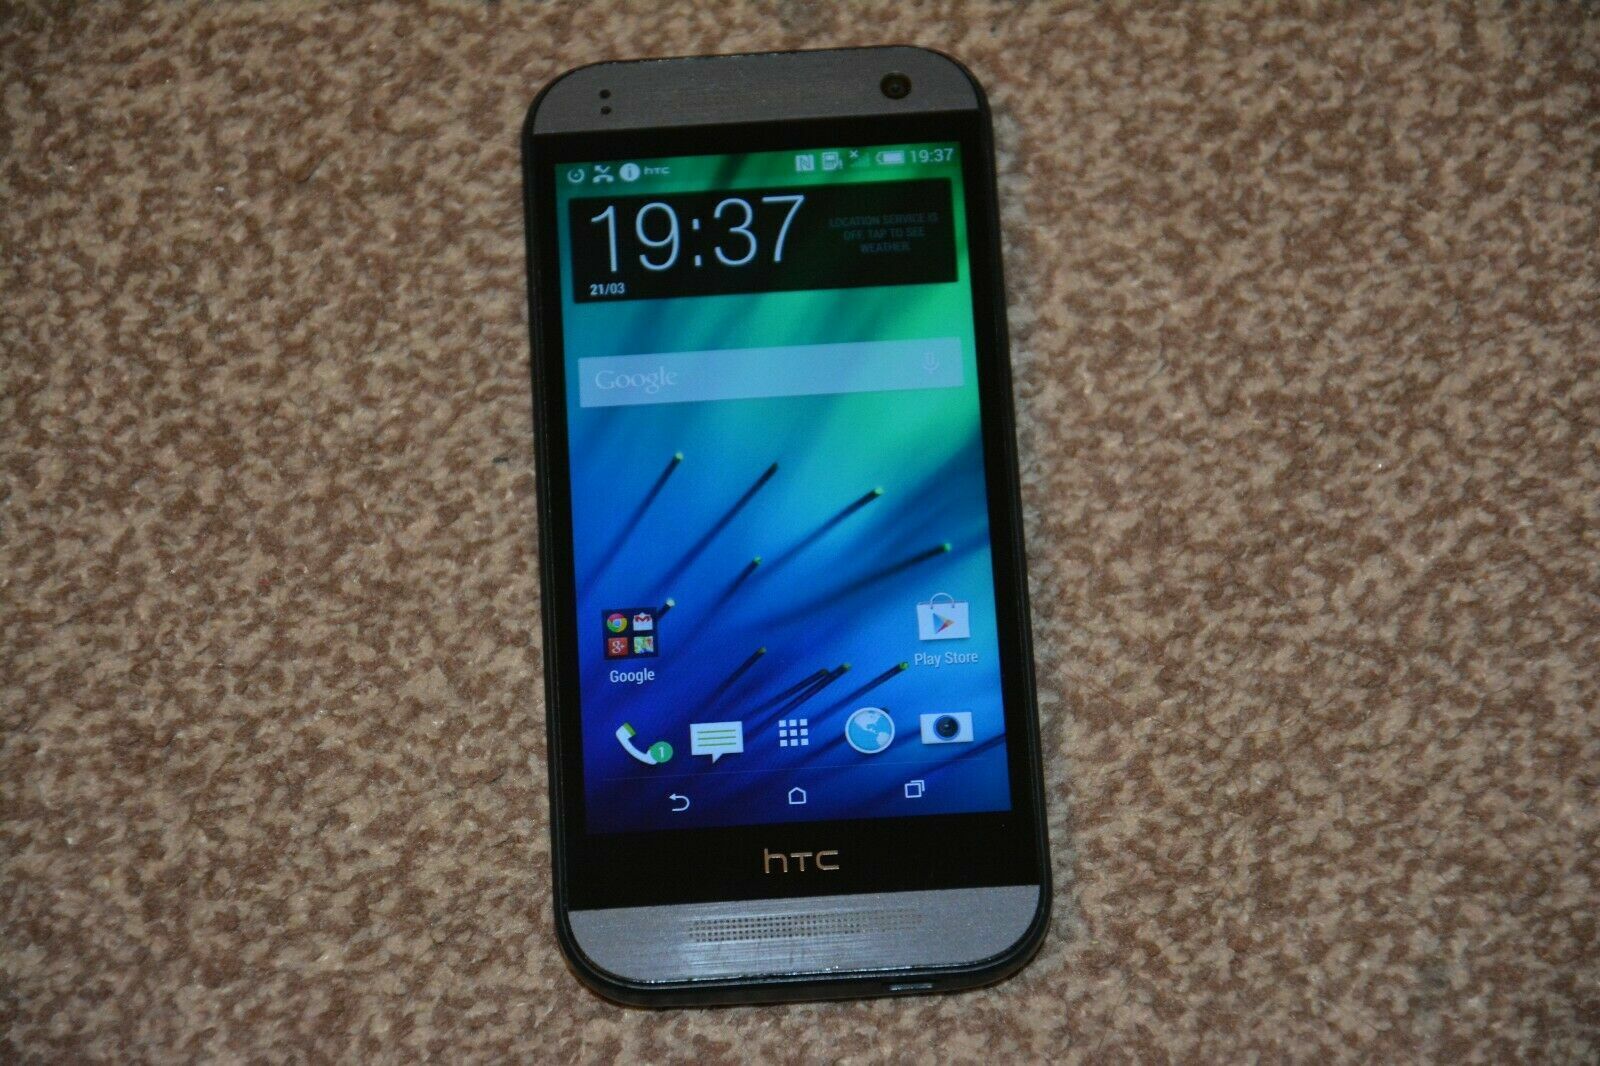 Legendary HTC prepping to launch a new premium phone? - PhoneArena